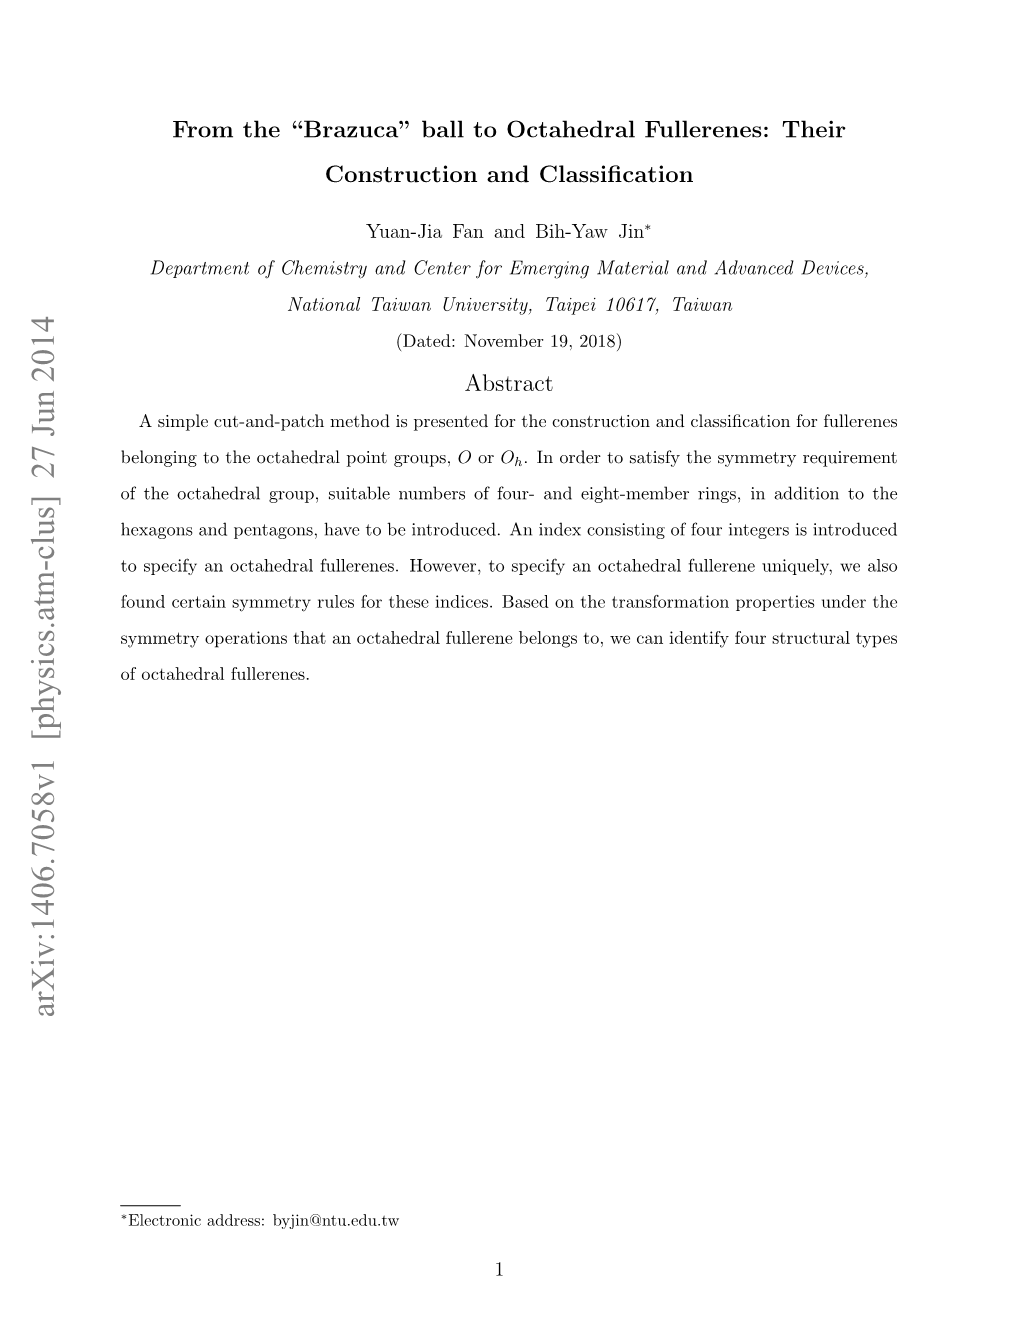 From The" Brazuca" Ball to Octahedral Fullerenes: Their Construction And